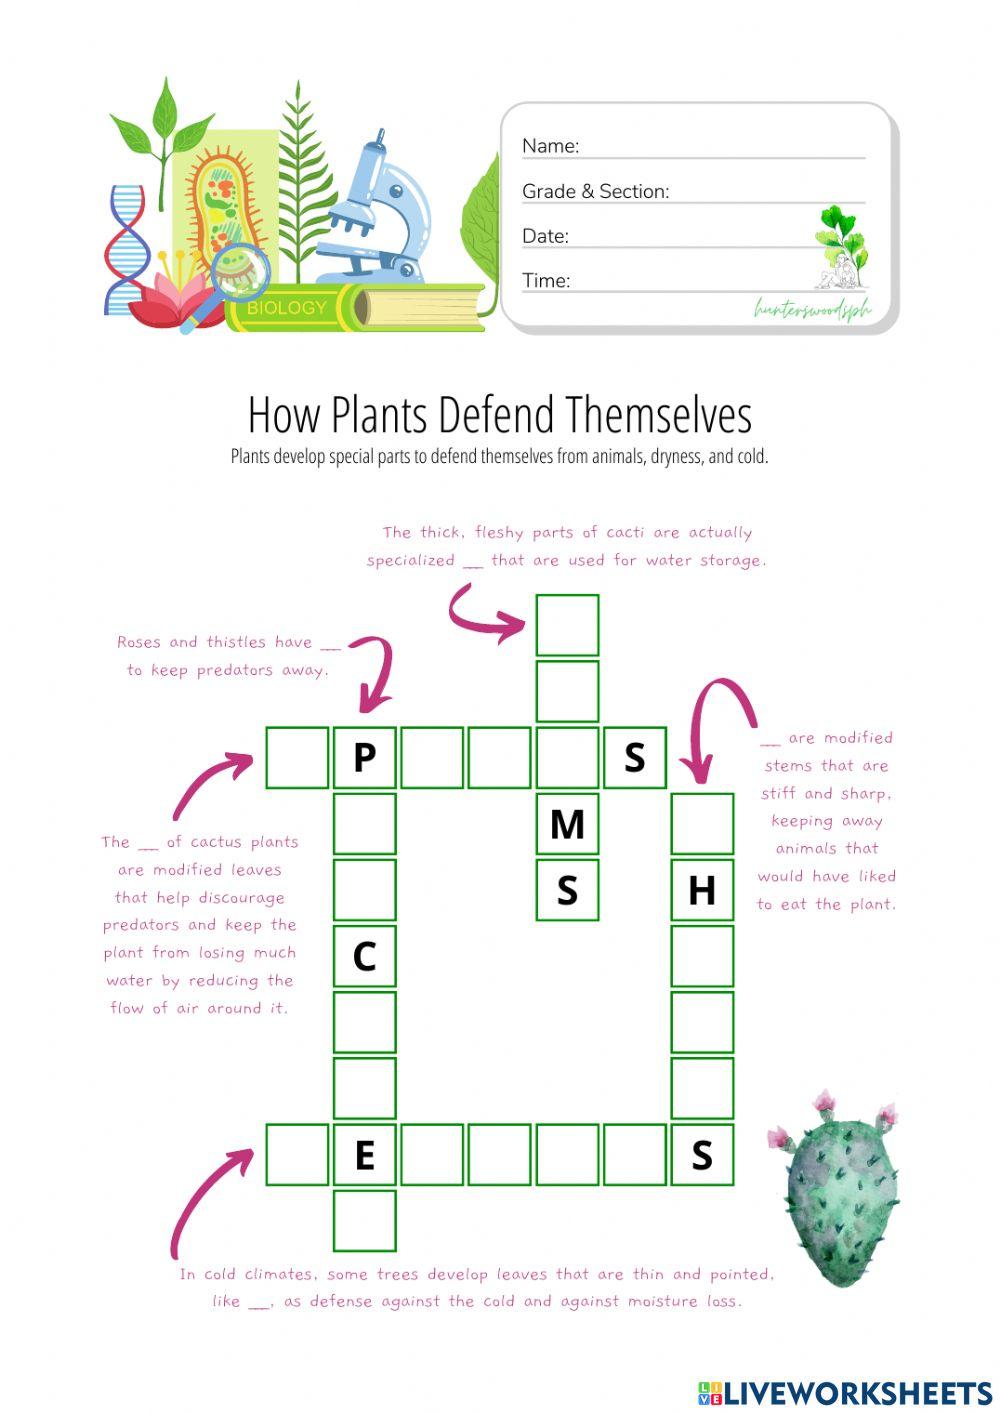 How Plants Defend Themselves